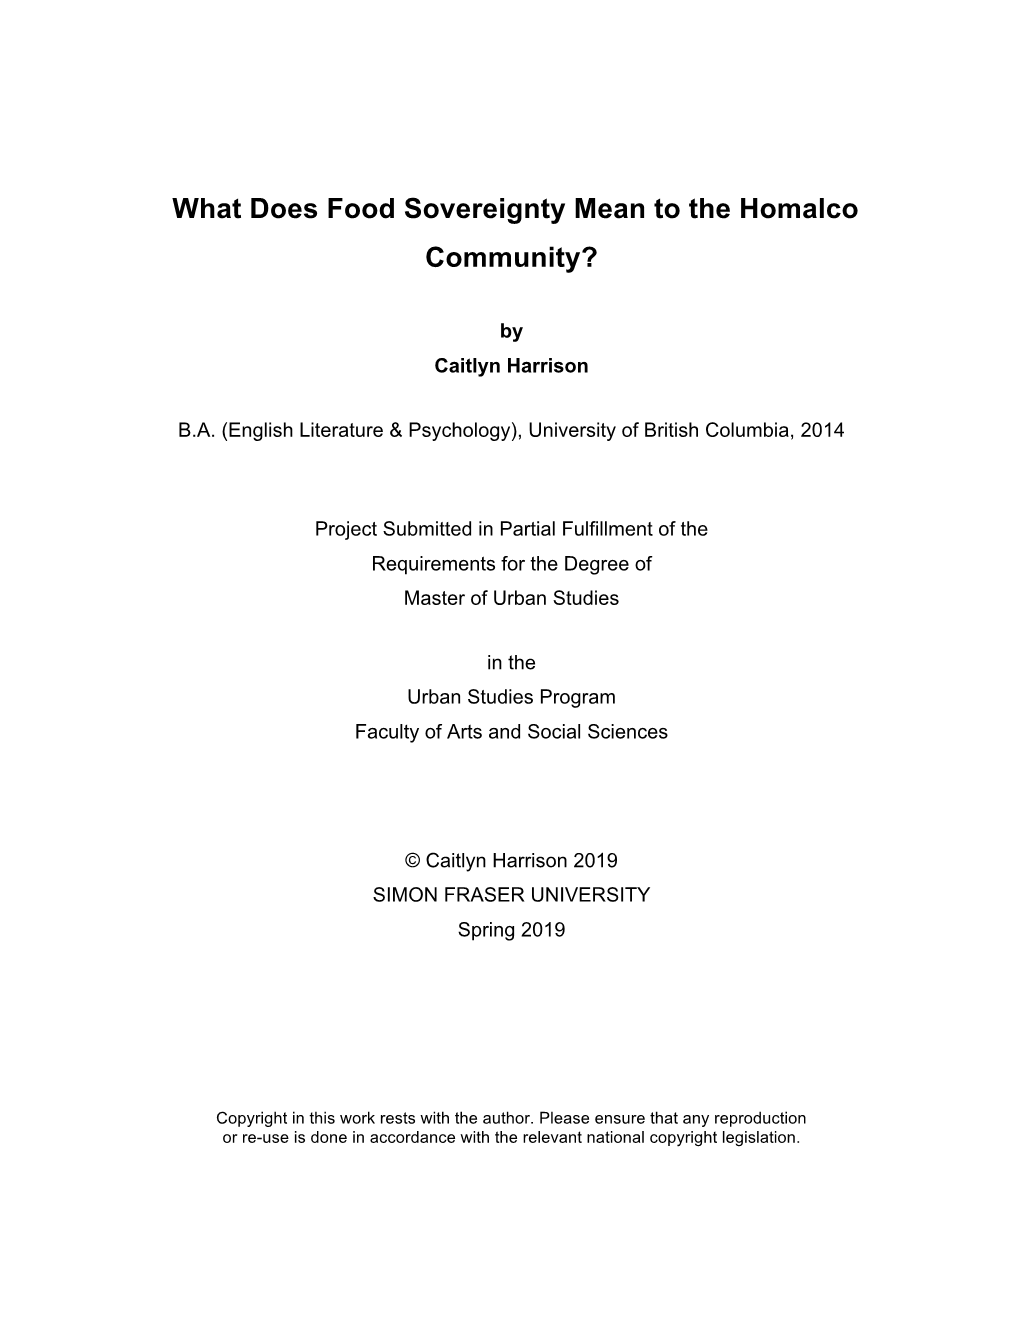 What Does Food Sovereignty Mean to the Homalco Community?